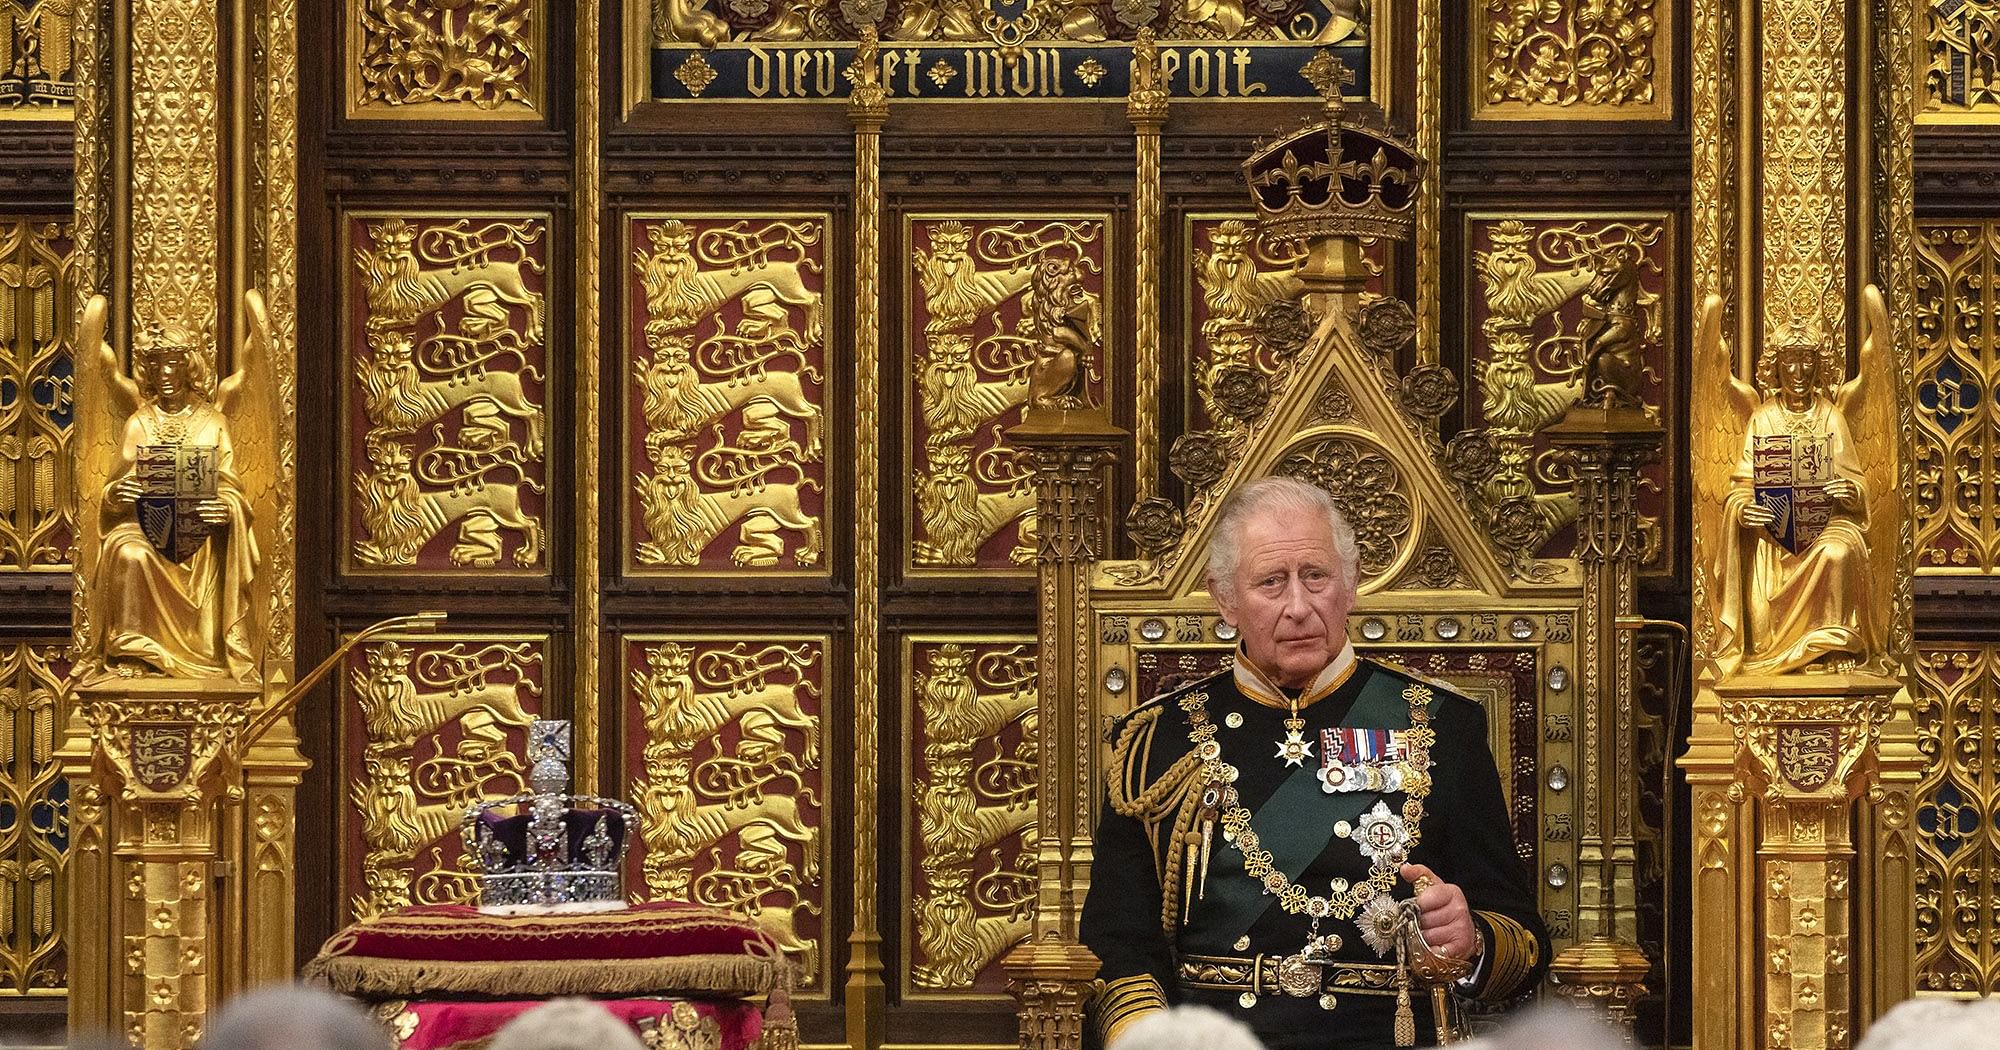 King Charles III Becomes Face Of The UK As Mourning Period Begins